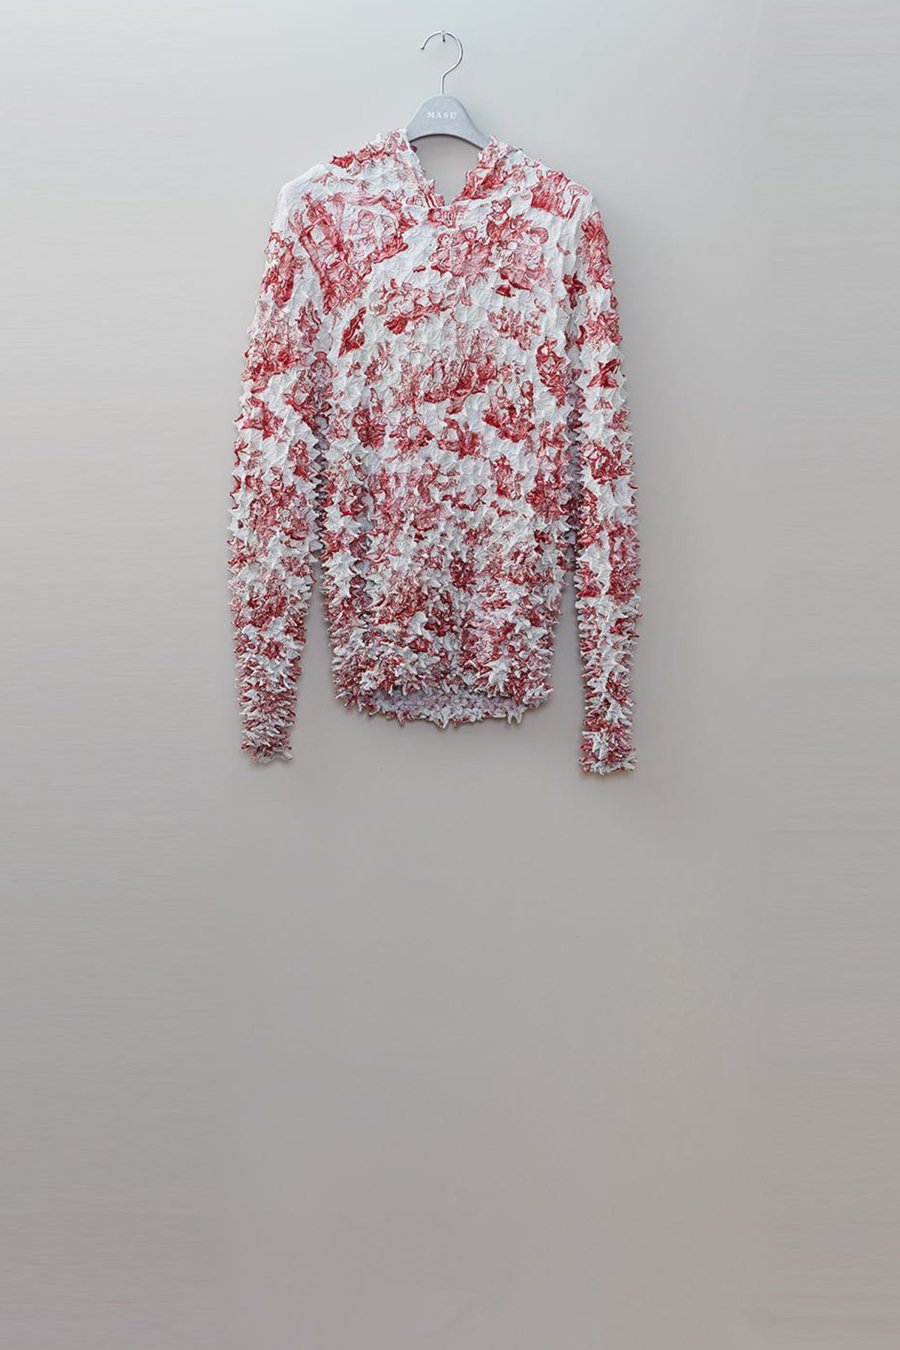 MASU  COMIC TOILE DE JOUY SPIKY HOODIE(RED)<img class='new_mark_img2' src='https://img.shop-pro.jp/img/new/icons15.gif' style='border:none;display:inline;margin:0px;padding:0px;width:auto;' />